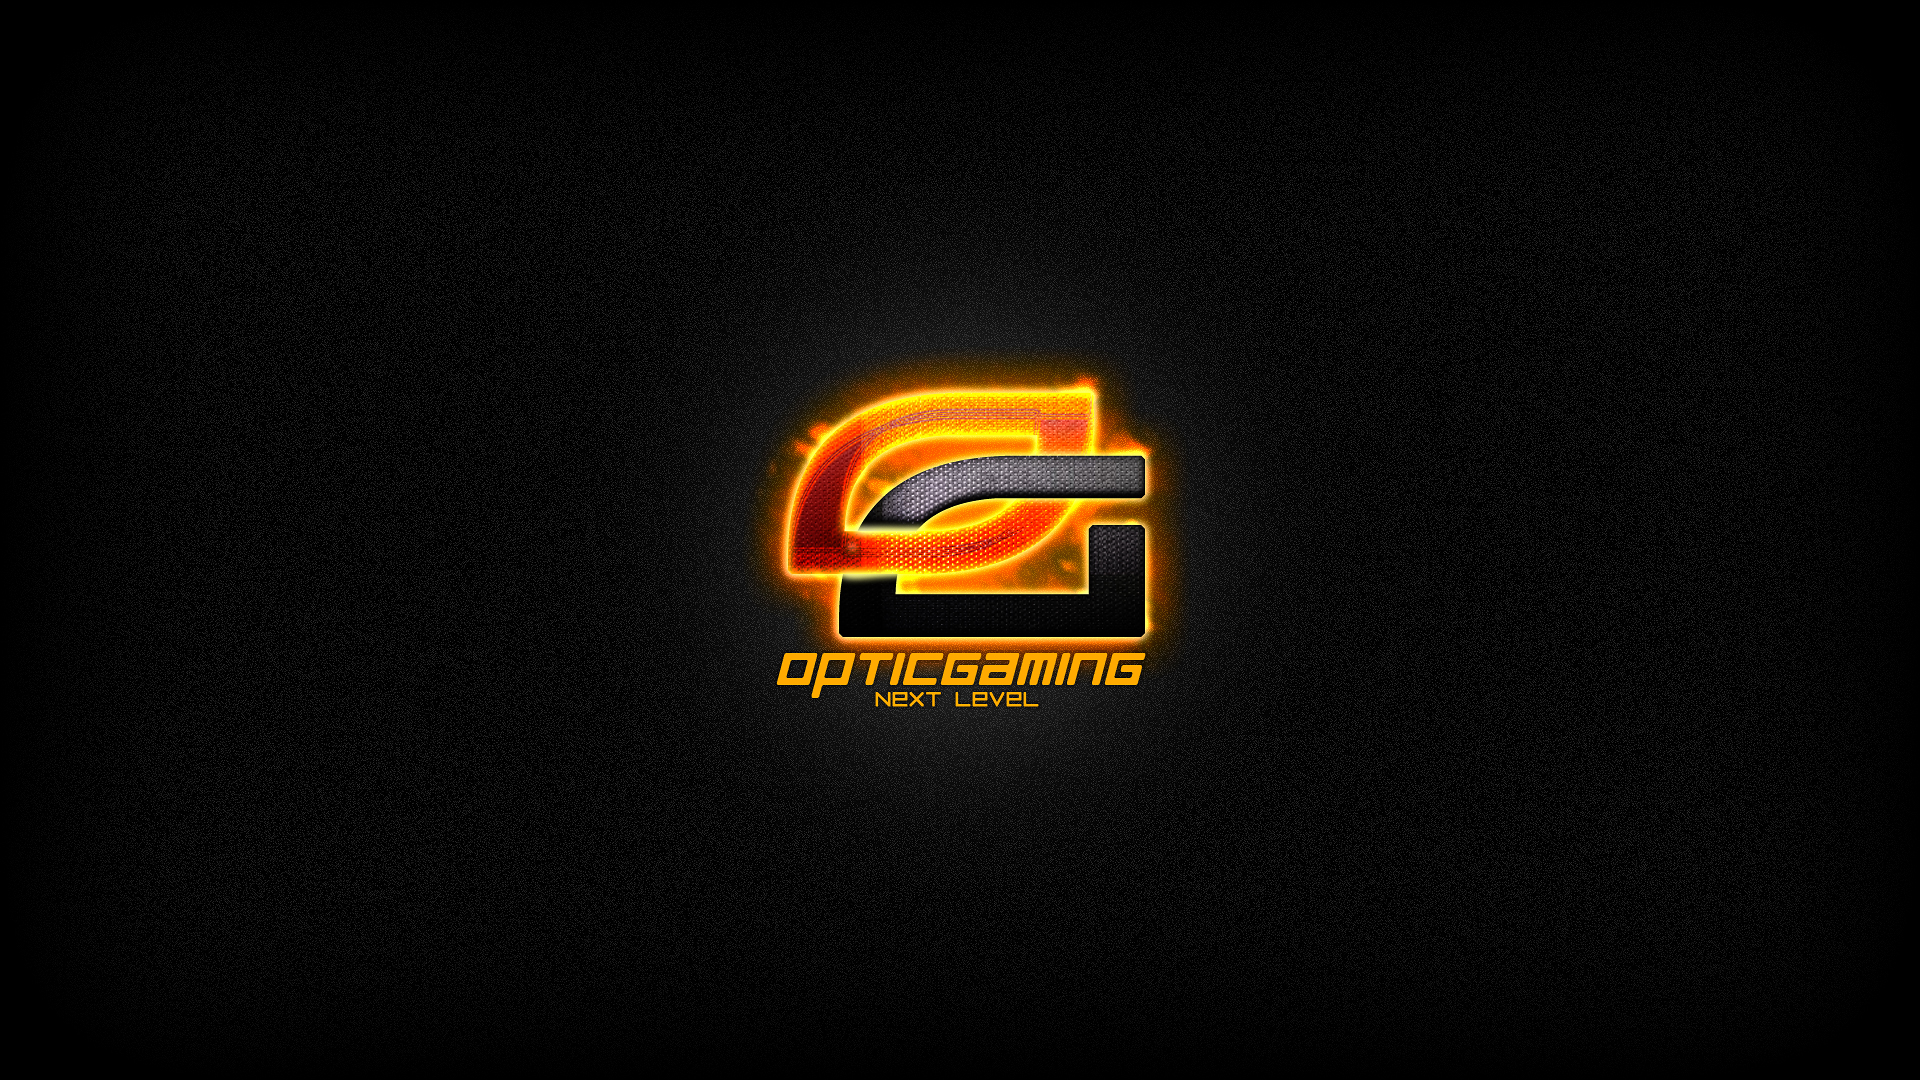 Opticgaming Next Level Wallpaper By Keepitfresh On